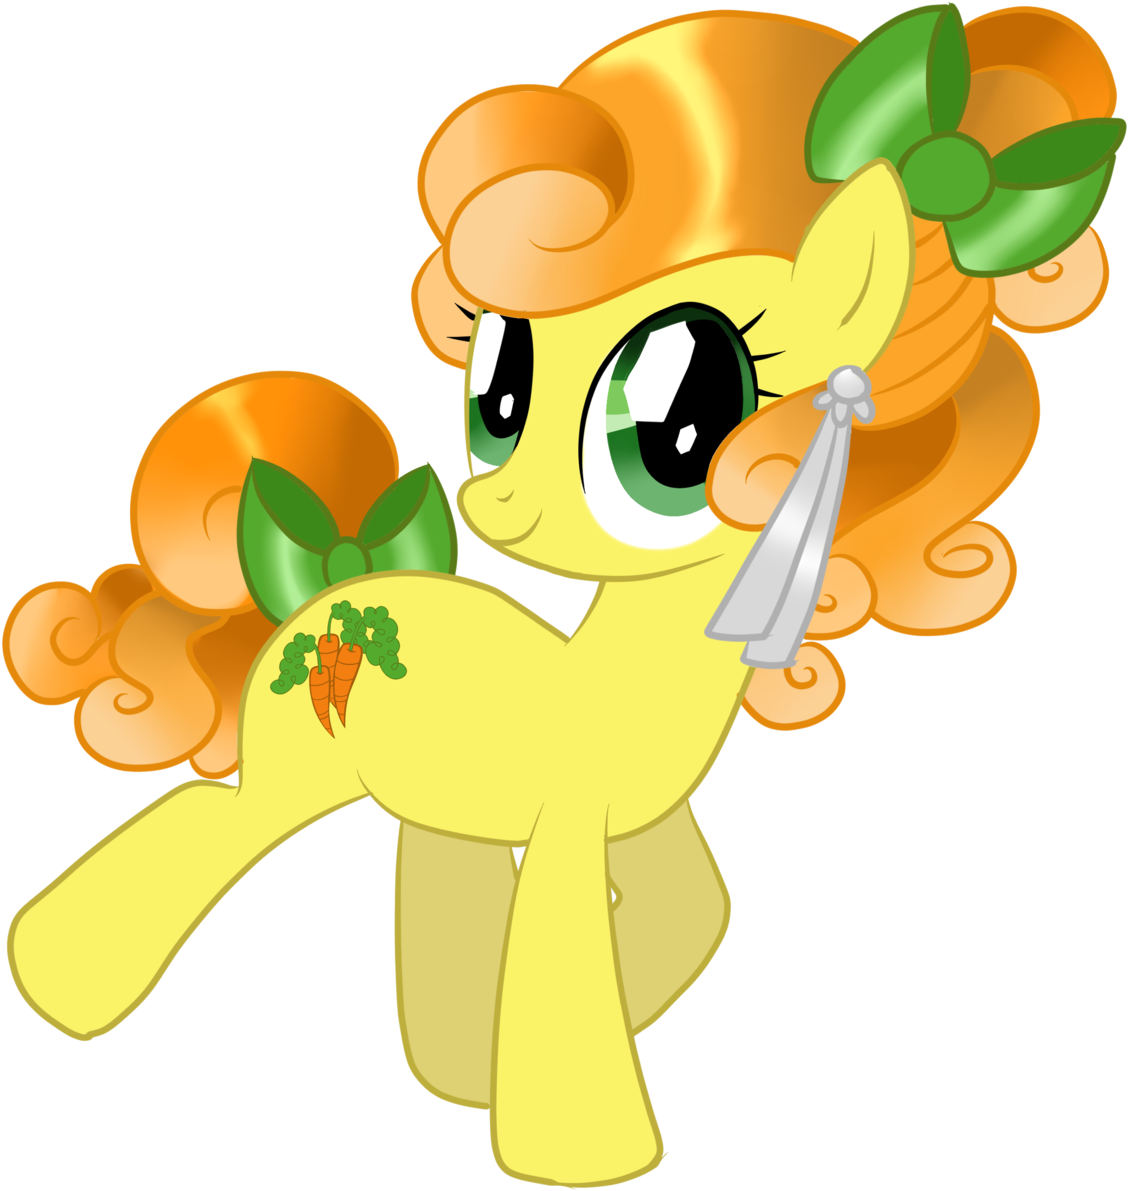 Carrot Top Crystal Pony - My Little Pony Carrot Top (1280x1280)